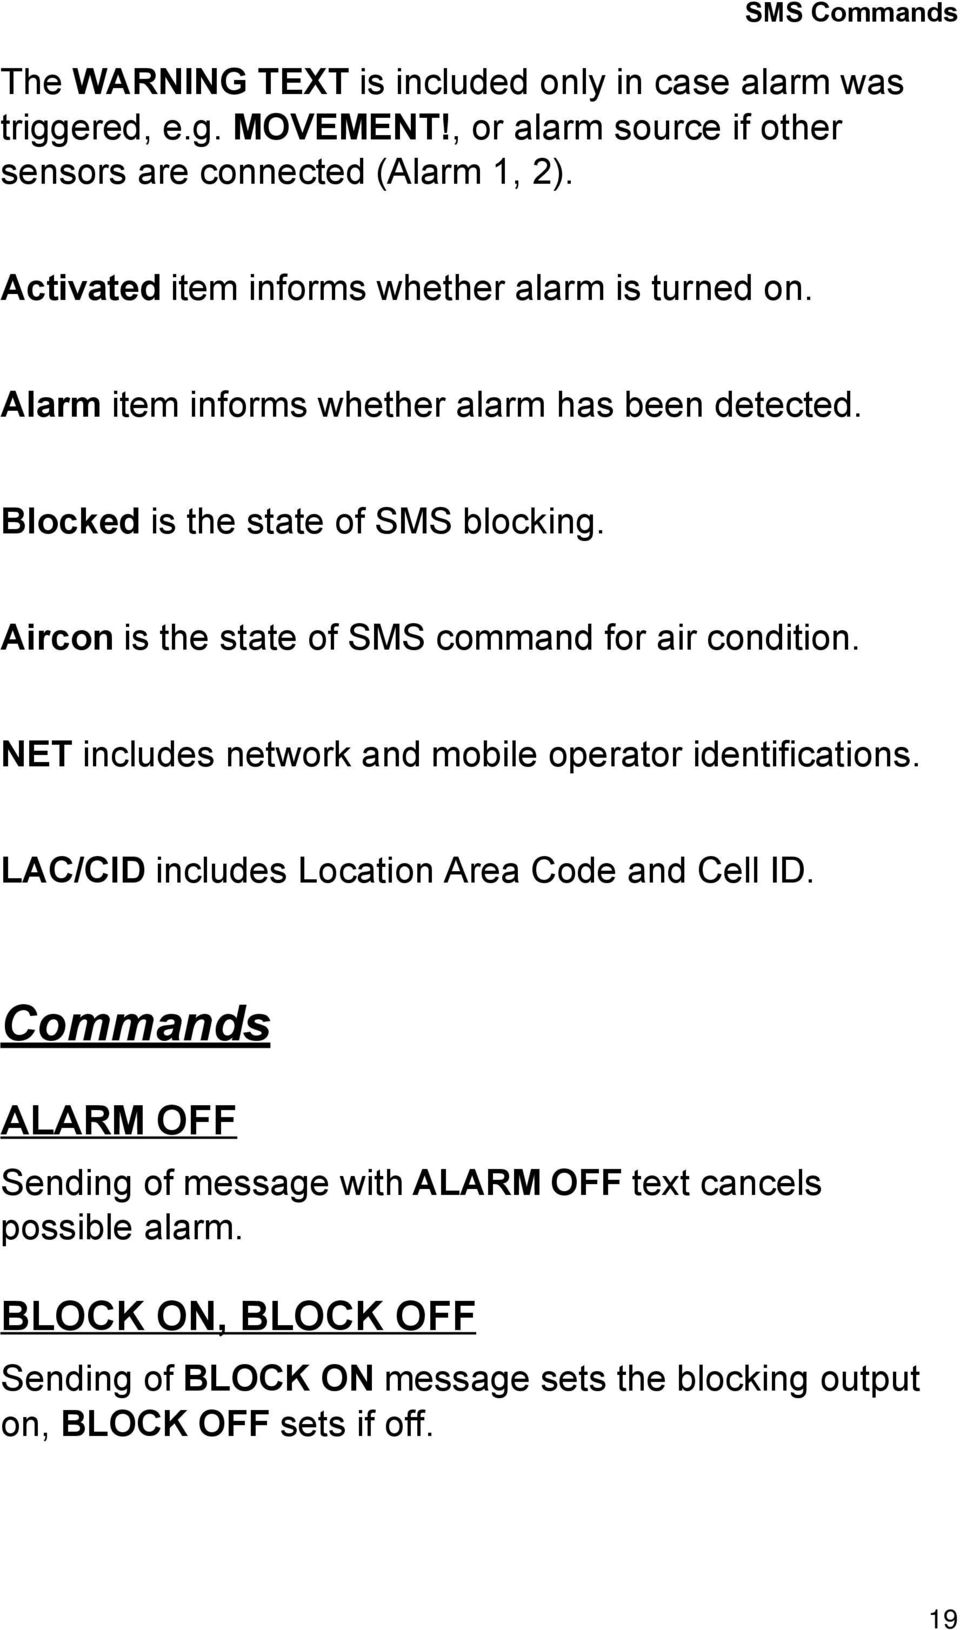 Aircon is the state of SMS command for air condition. NET includes network and mobile operator identifications. LAC/CID includes Location Area Code and Cell ID.